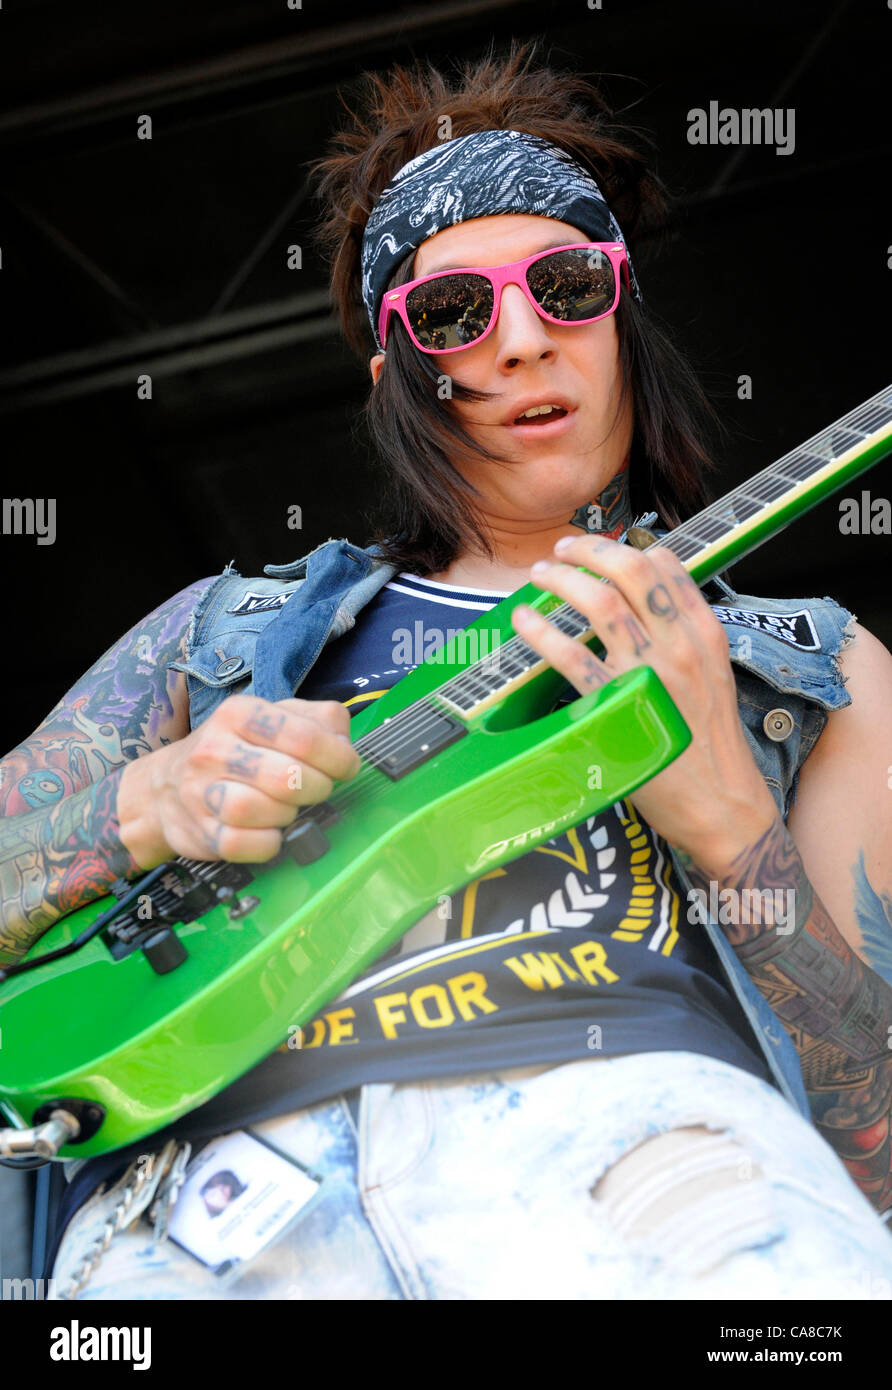 Jacky Vincent High Resolution Stock Photography and Images